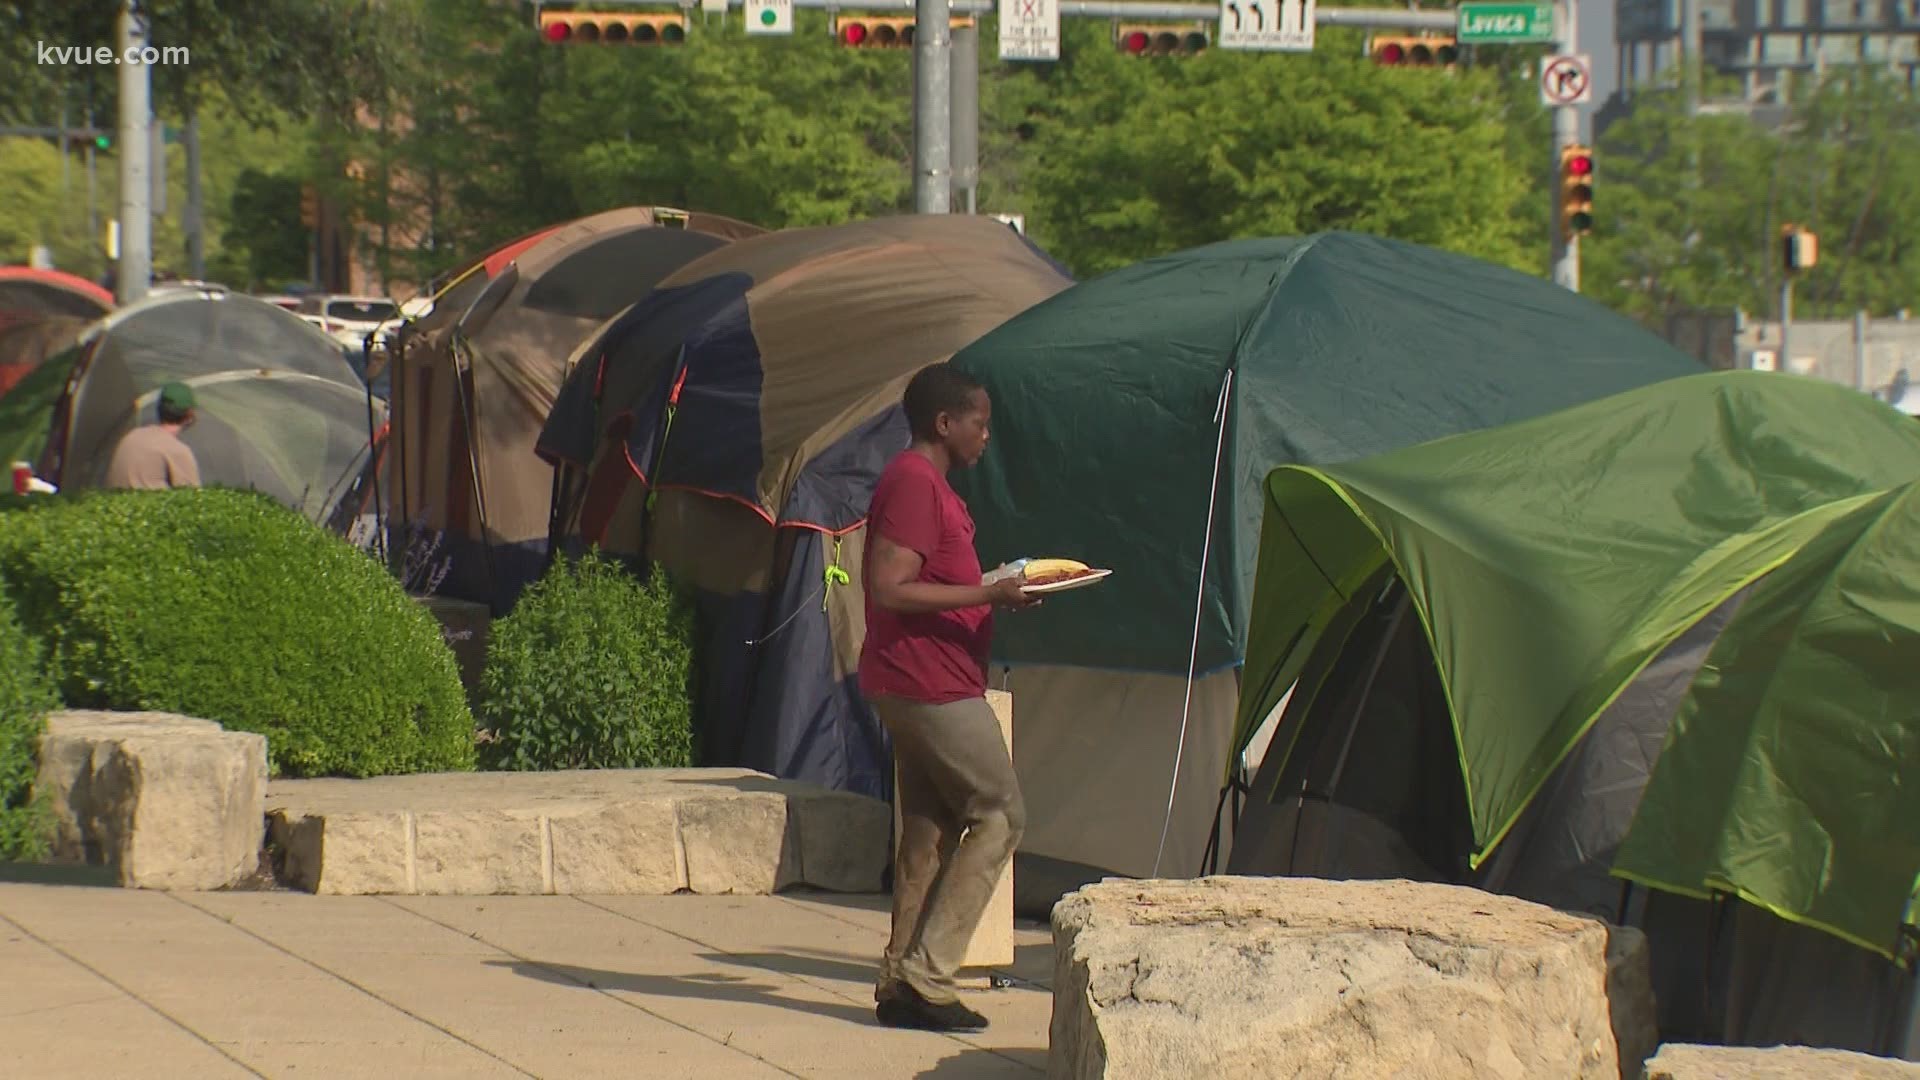 Austin voters approved Proposition B, which aims to reinstate the City's camping ban. KVUE's Mari Salazar spoke to some of the city's homeless population.